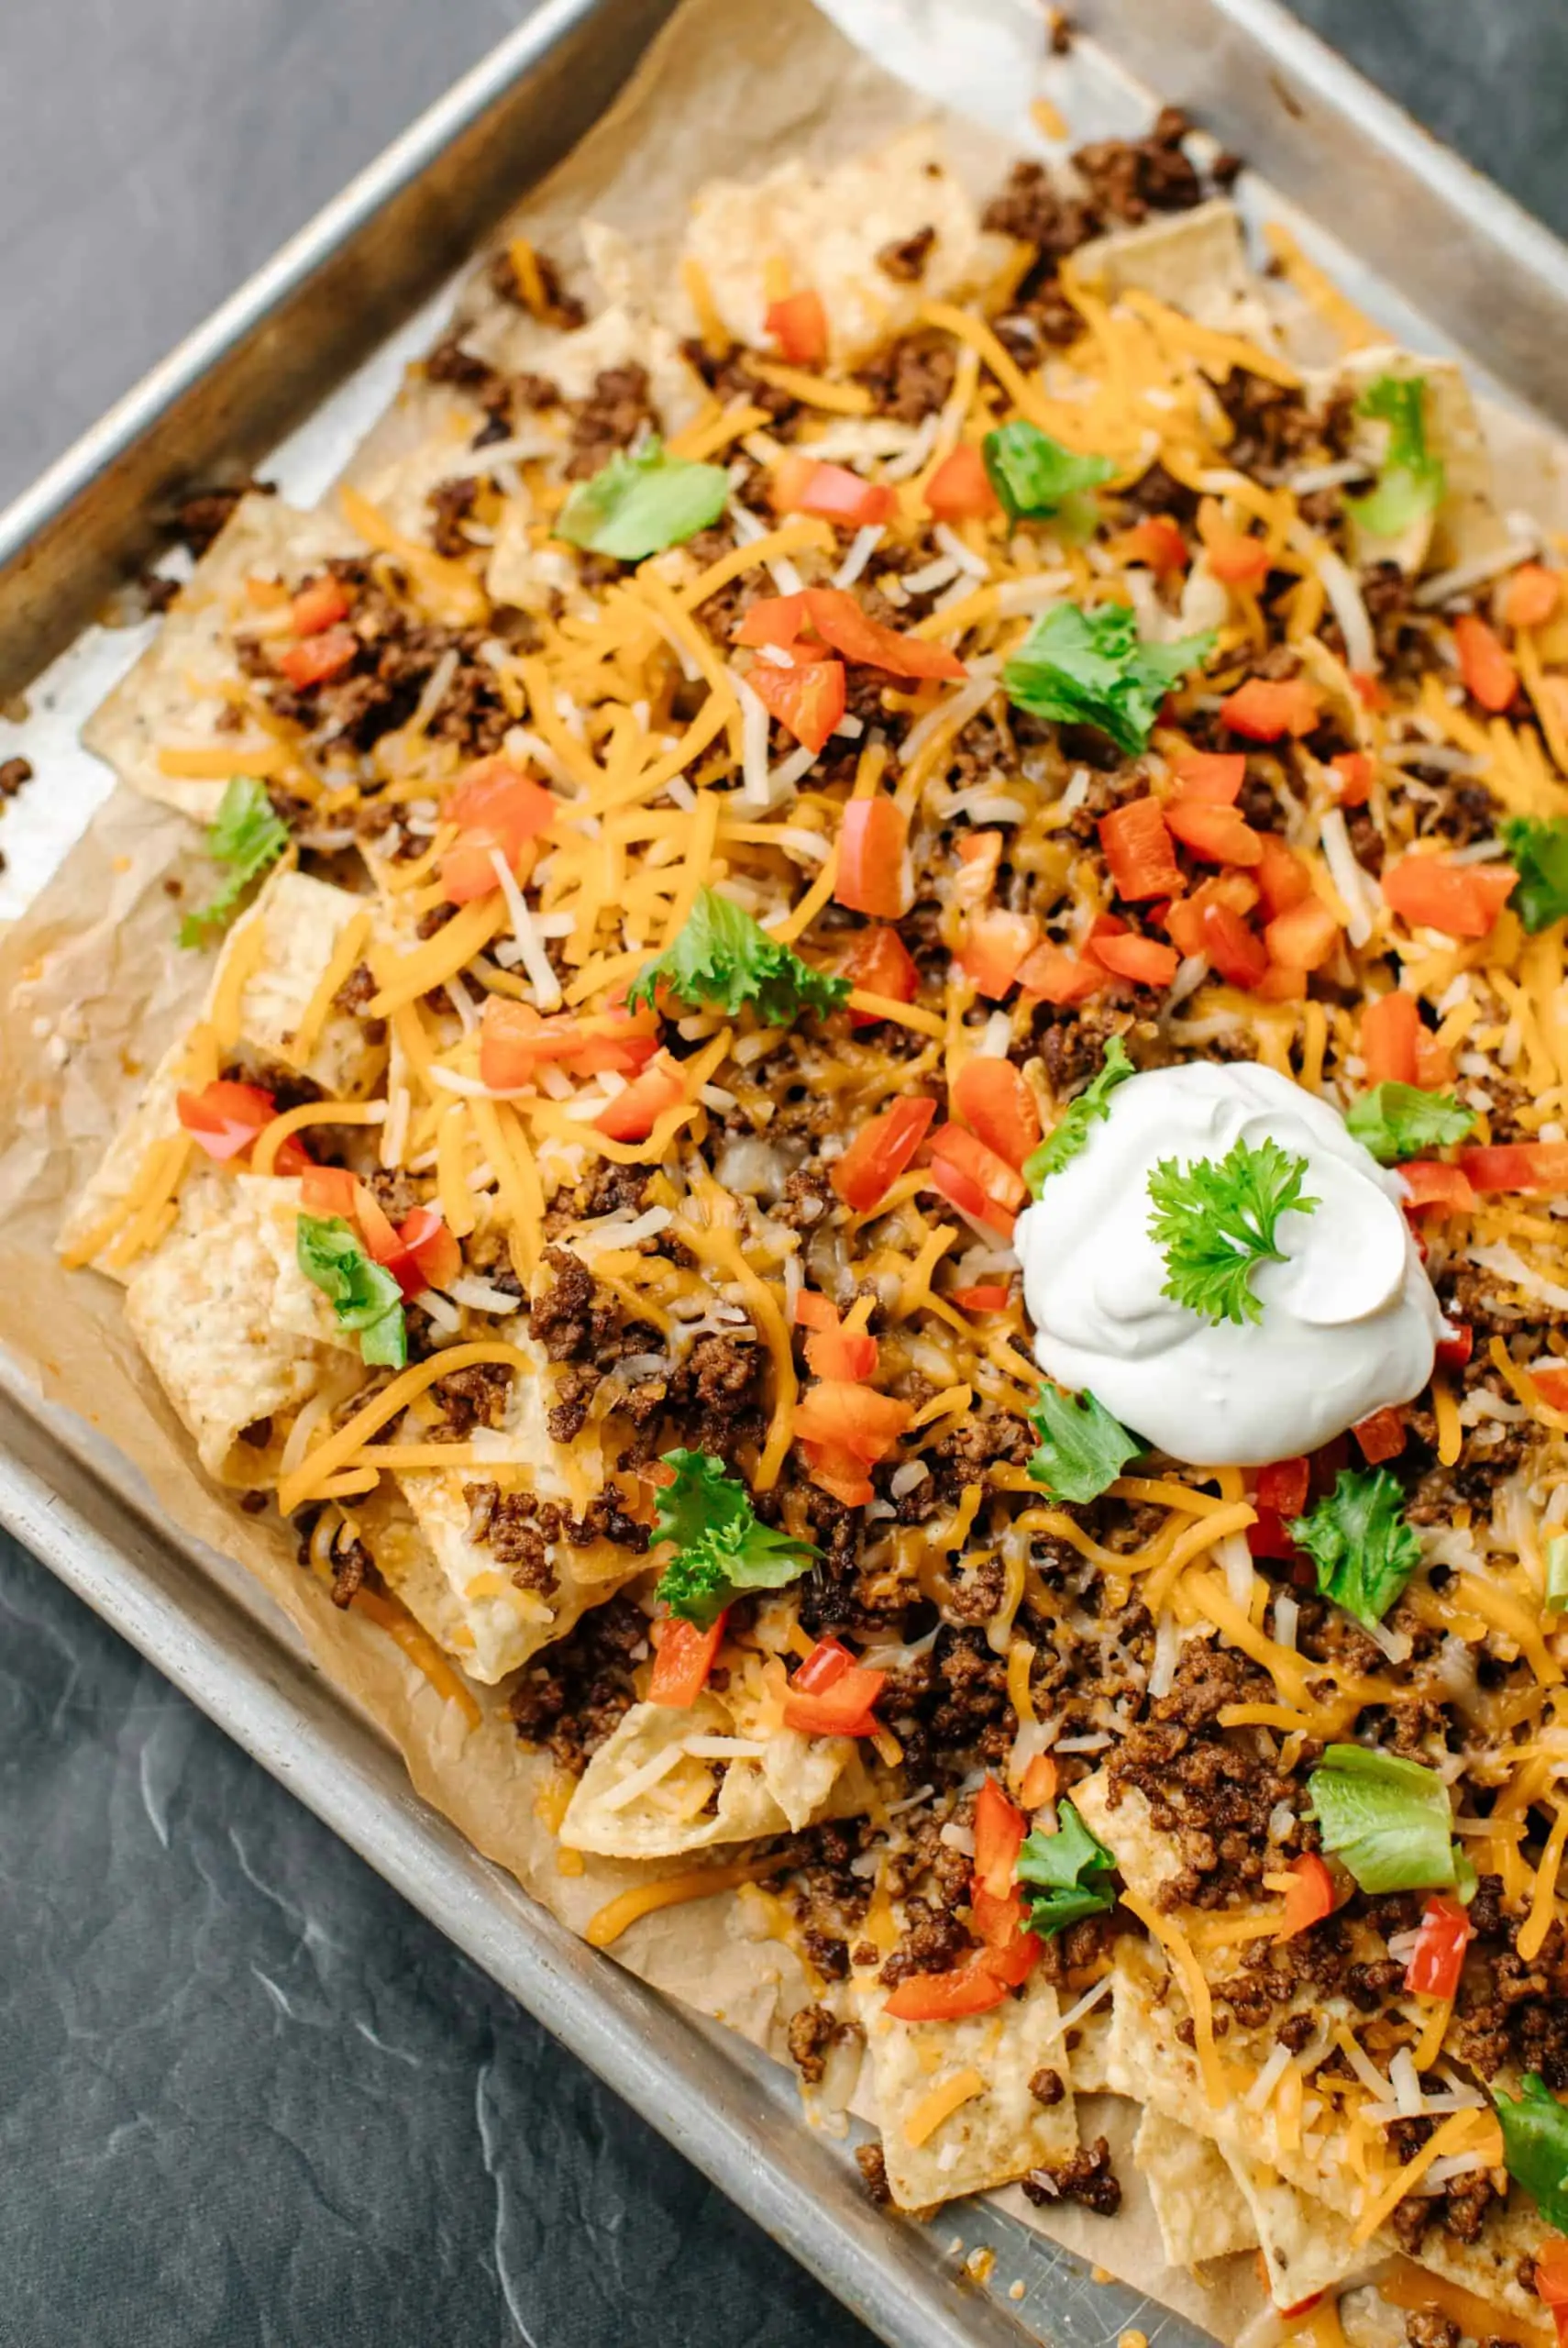 Loaded nachos with cheese, salsa, and sour cream on top of tortilla chips.